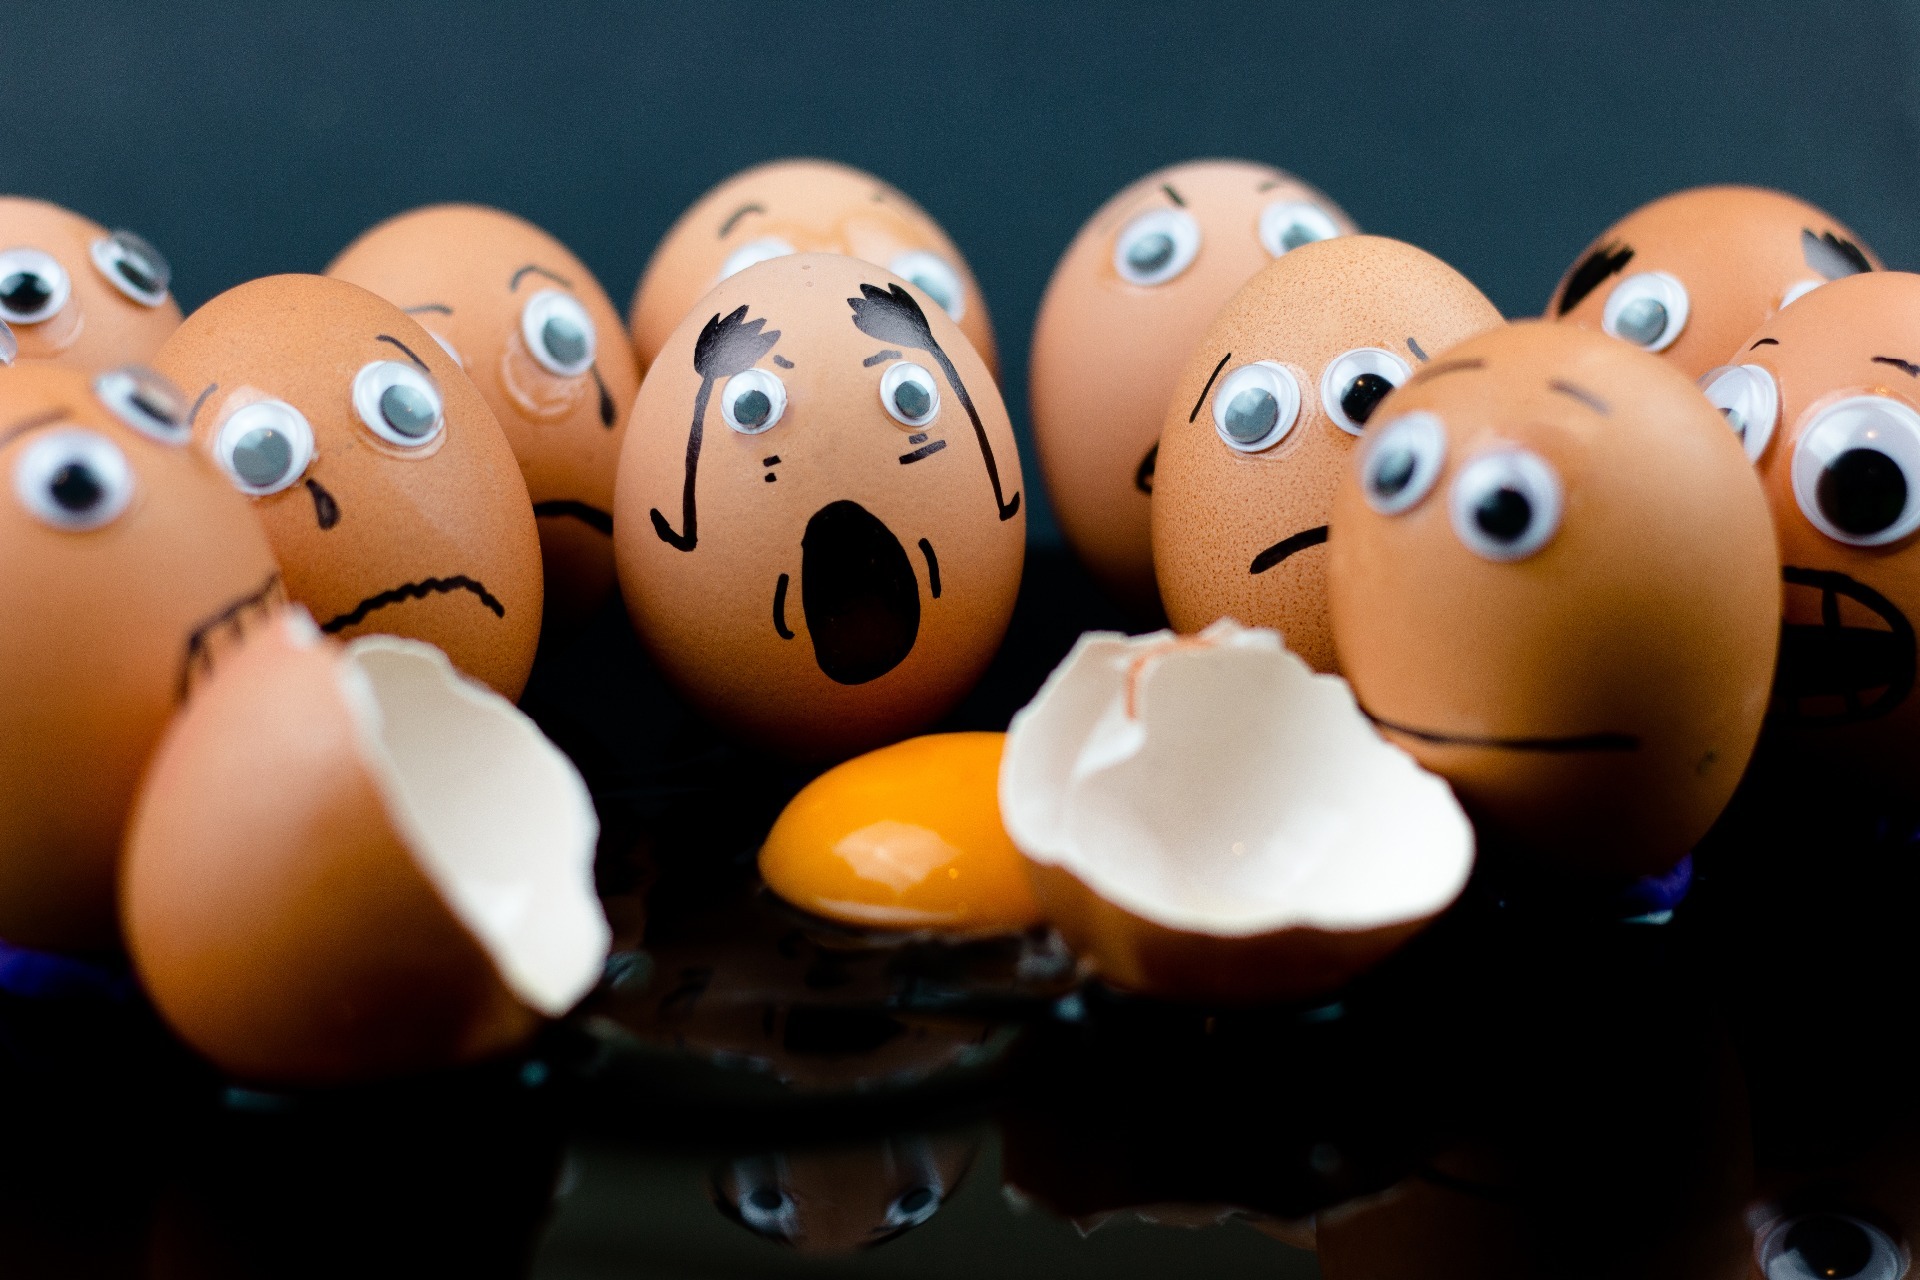 Eggs with faces drawn on, crying and in shock, with a broken egg on the floor.